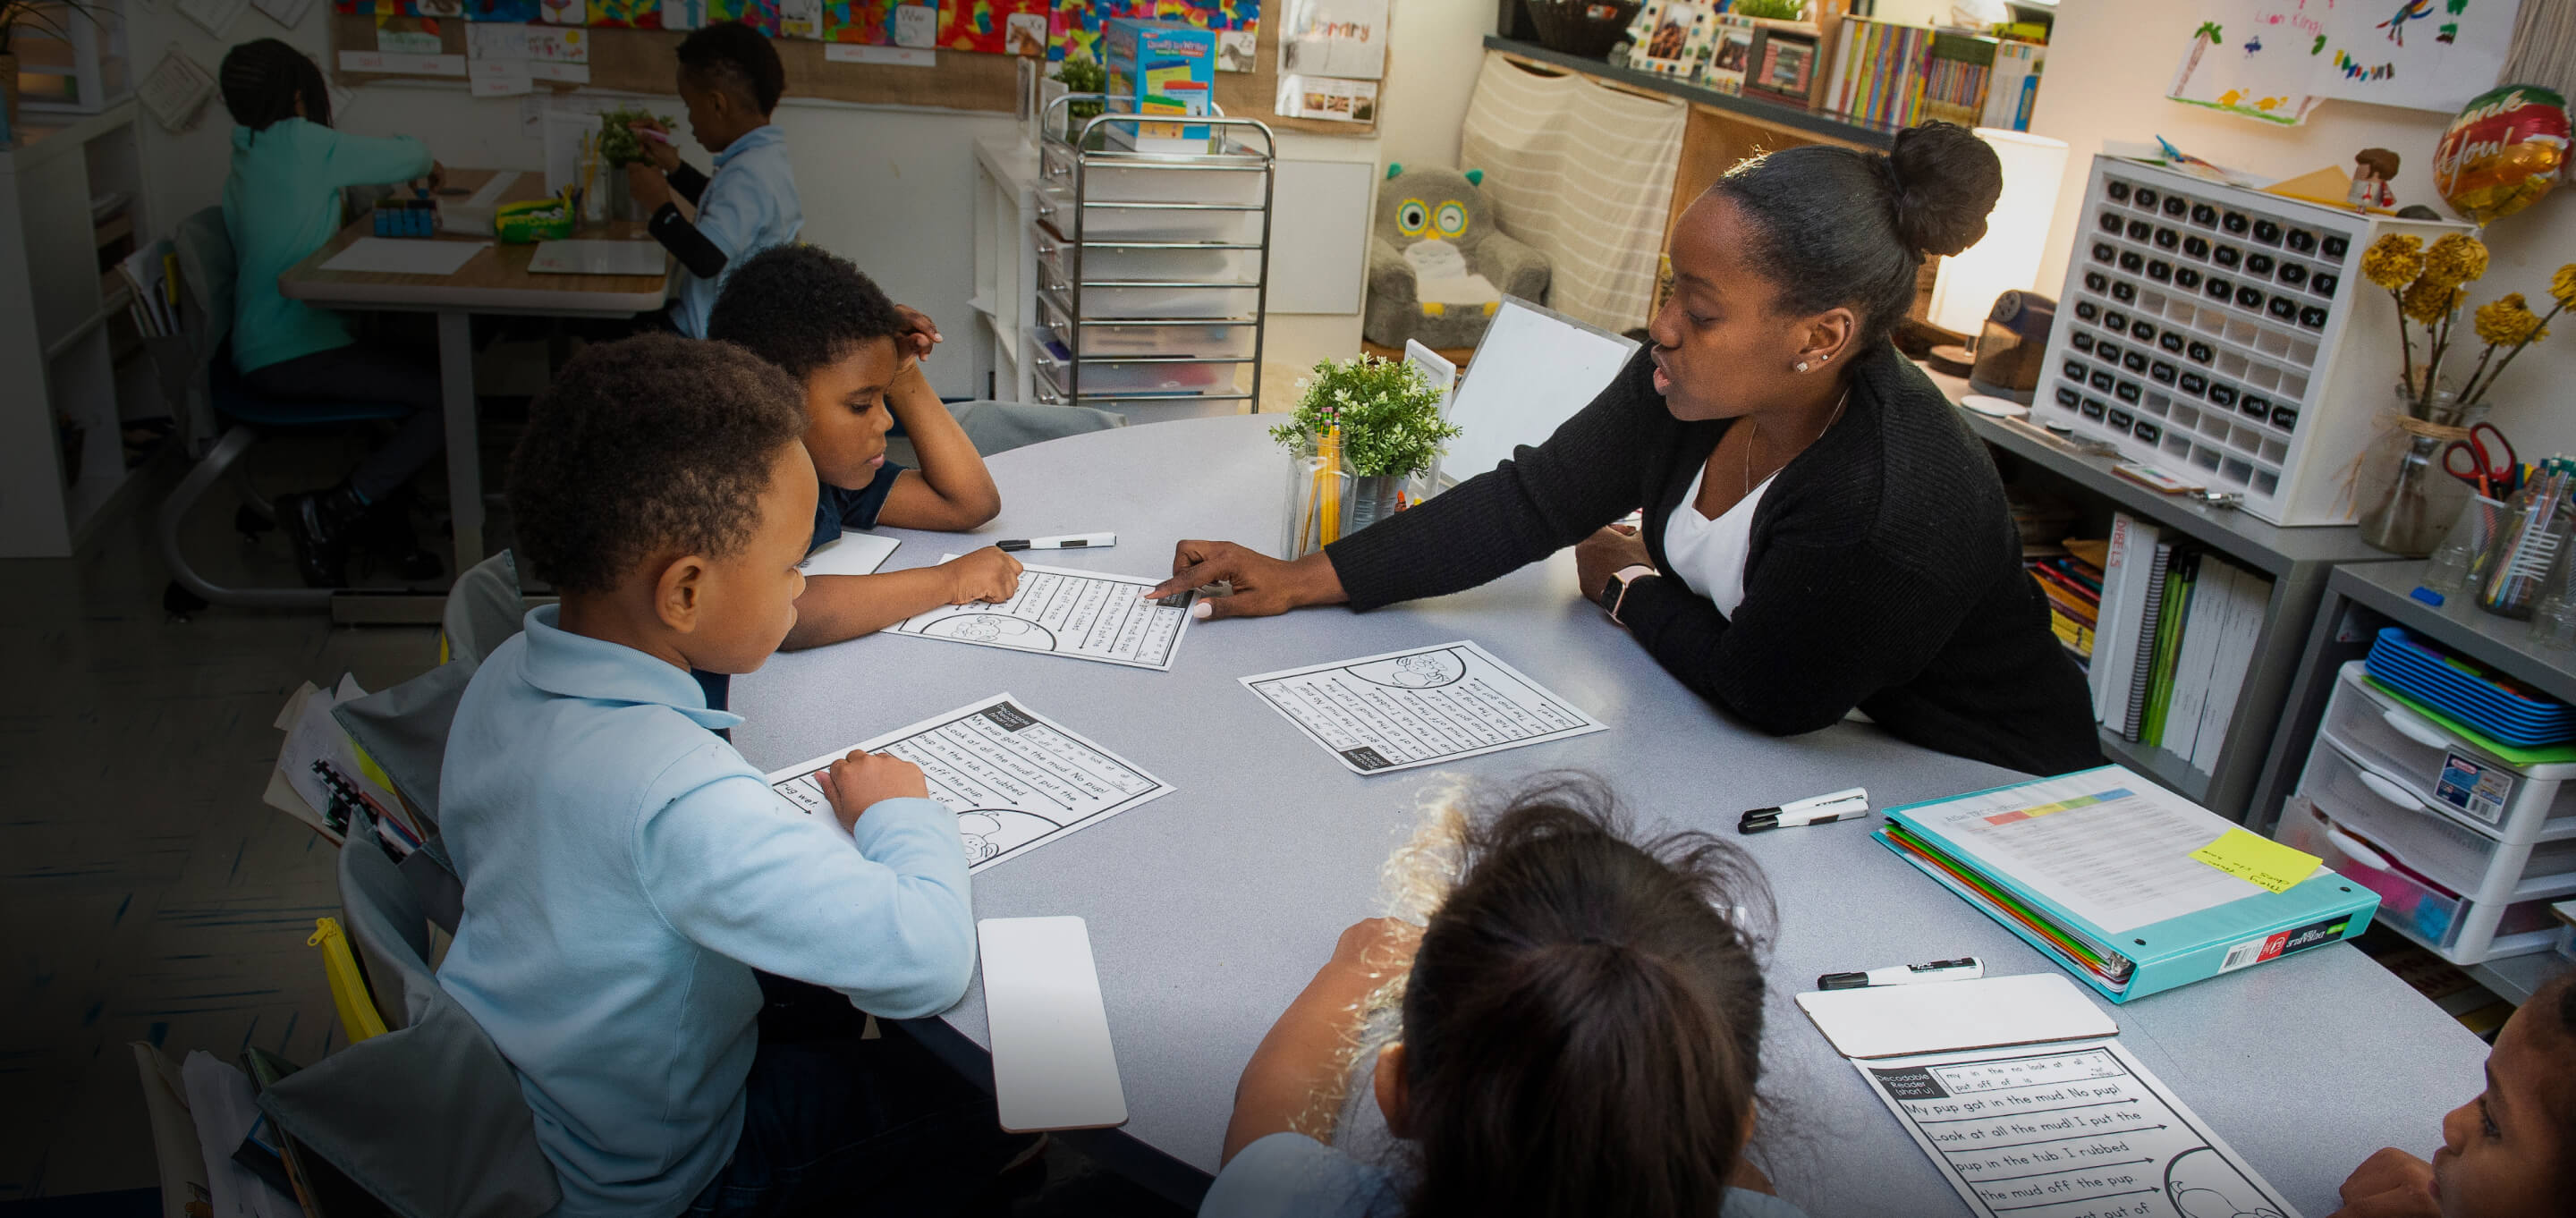 Teacher sitting at a desk and helping students with their work in the classroom